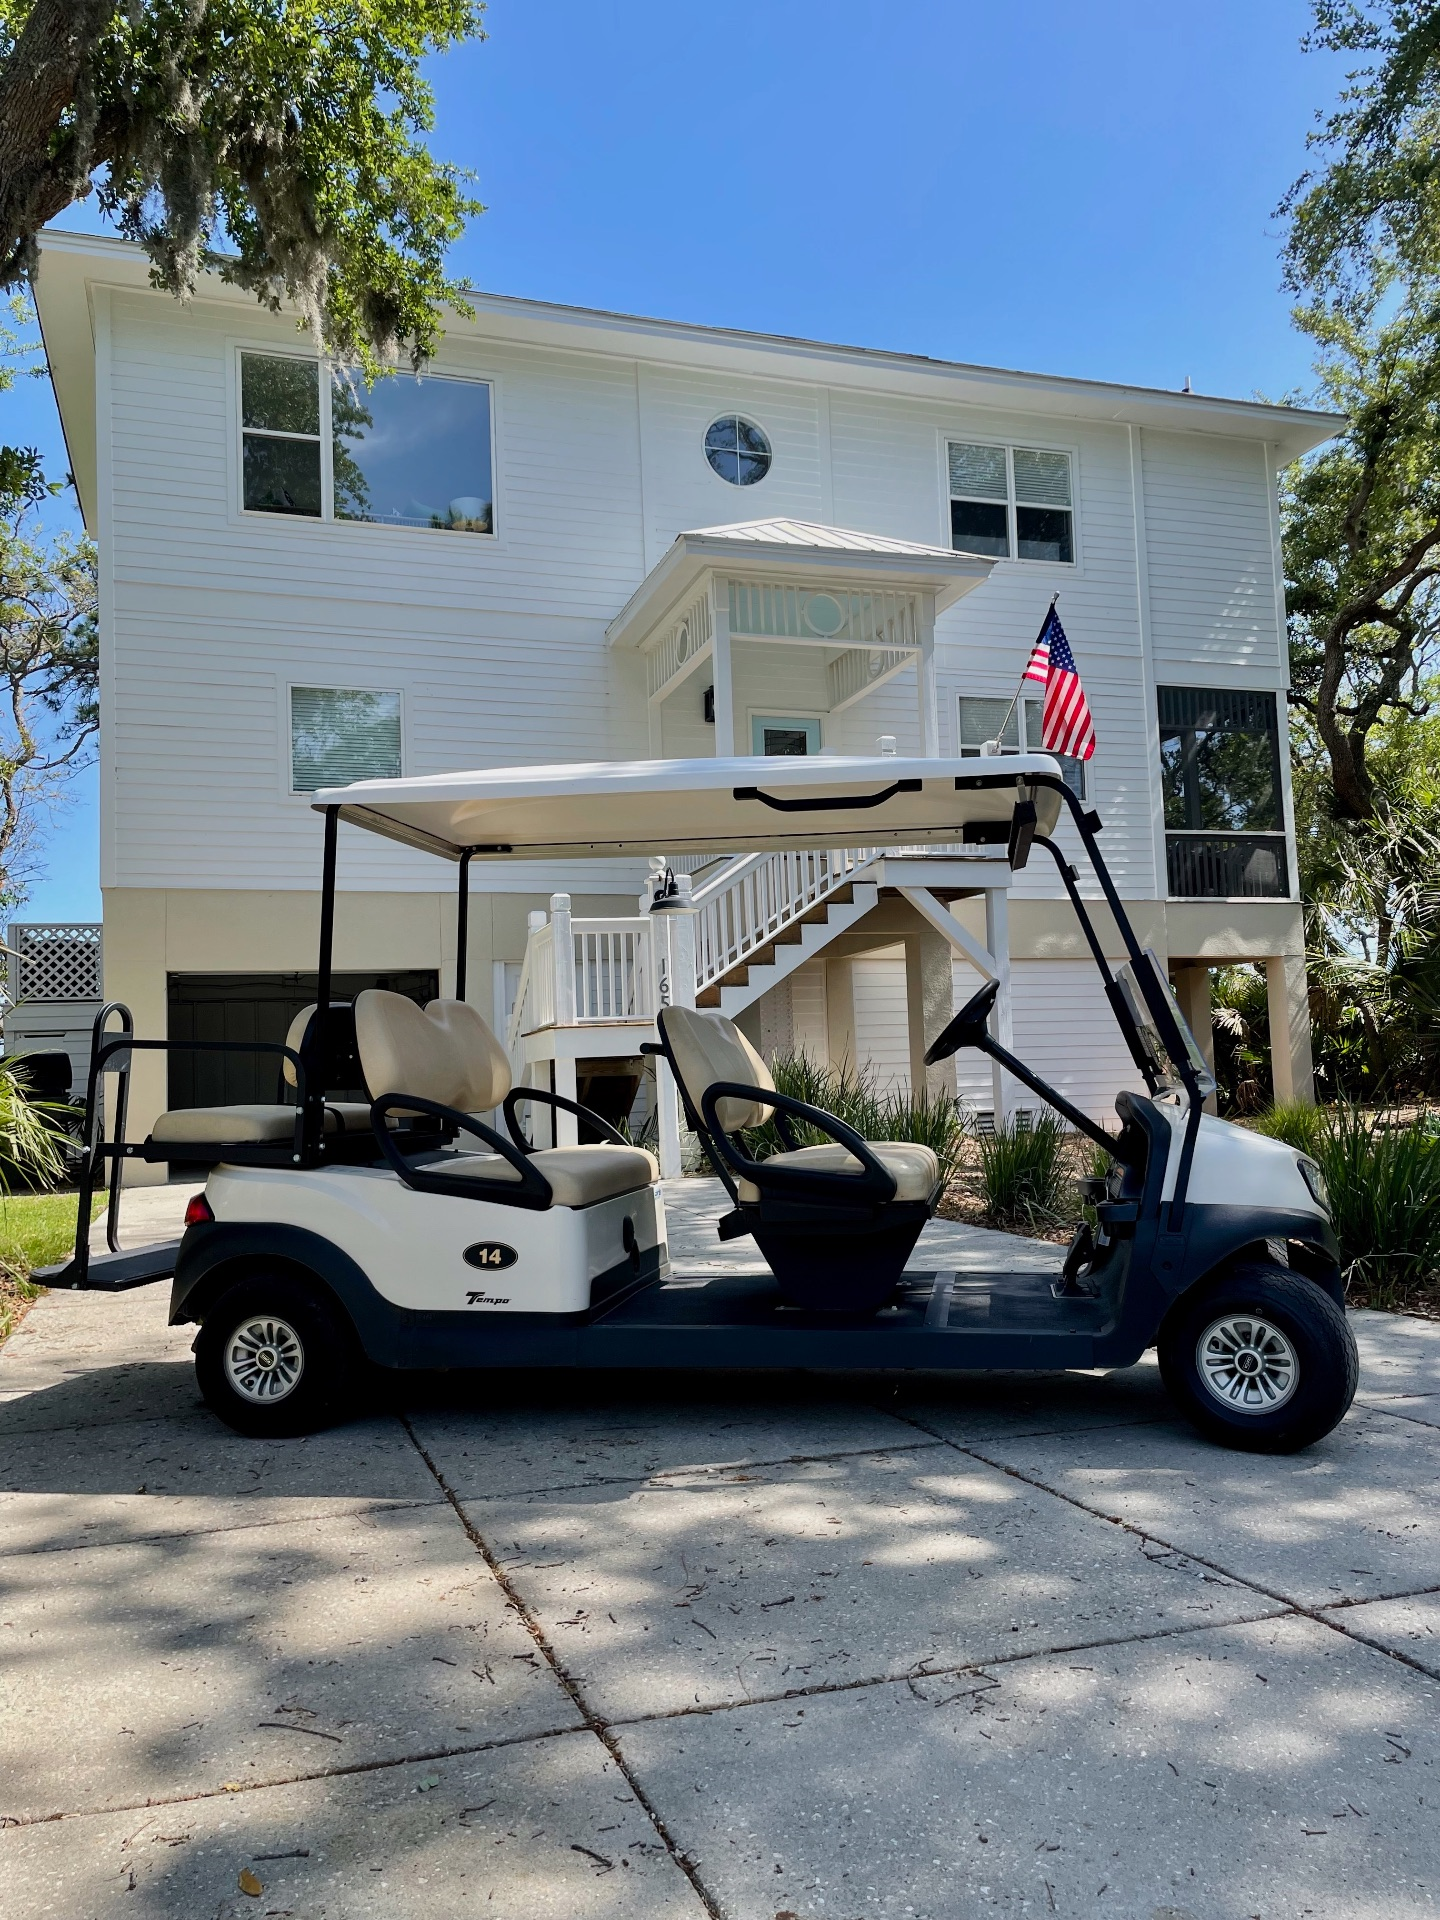 Six seat limo golf cart included with the rental.